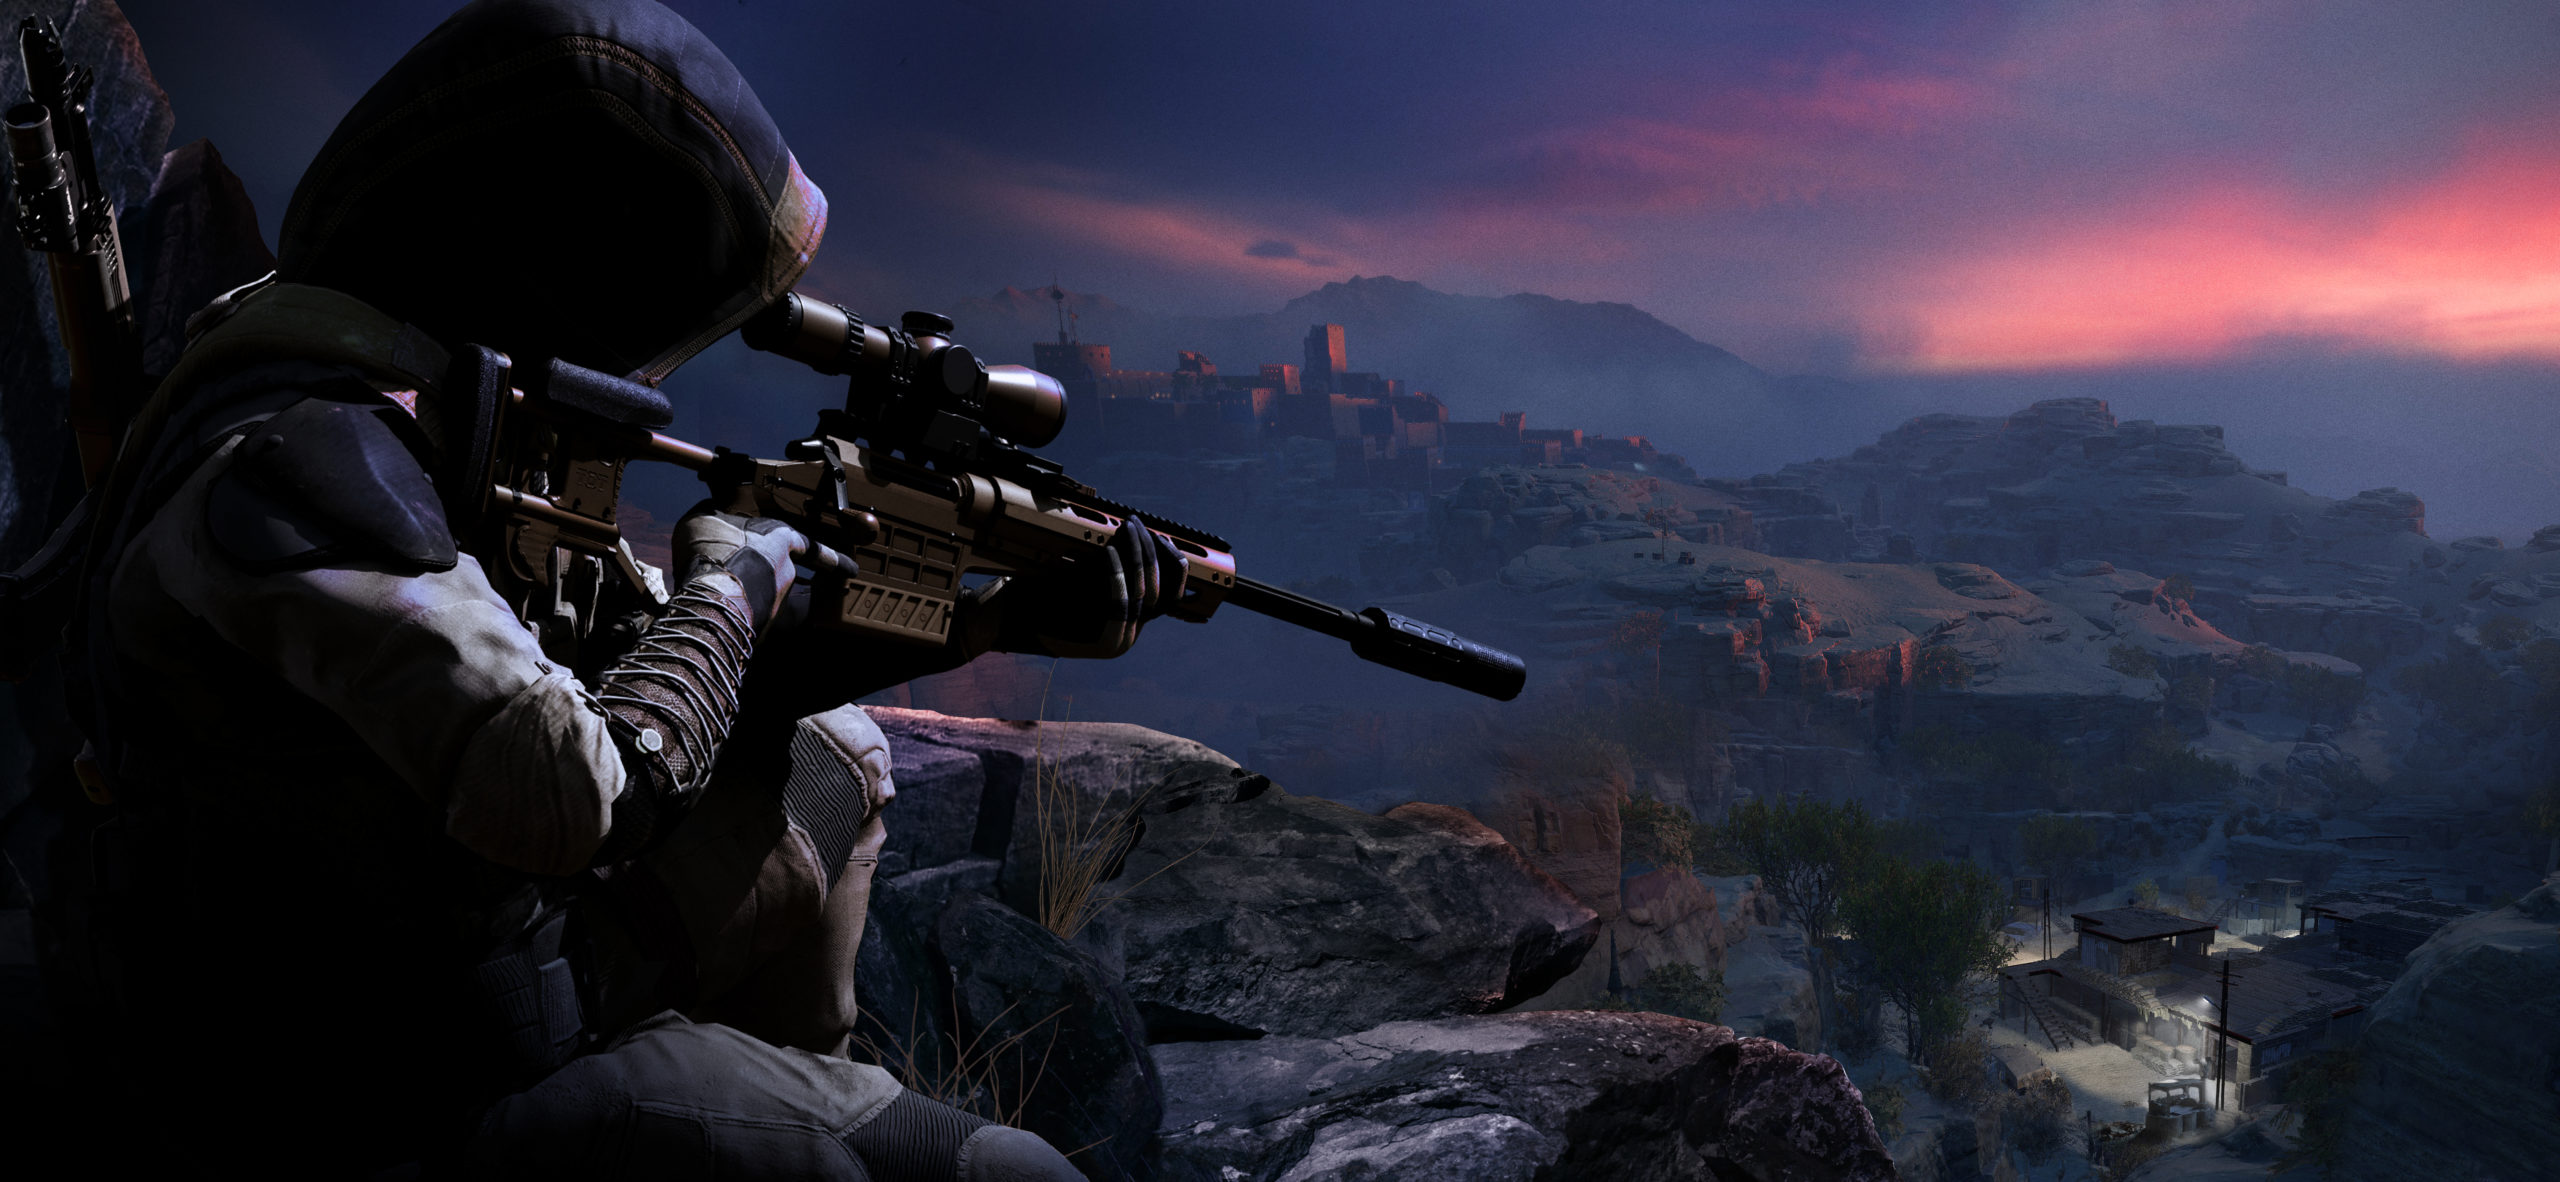 sniper ghost warrior contracts 2 review